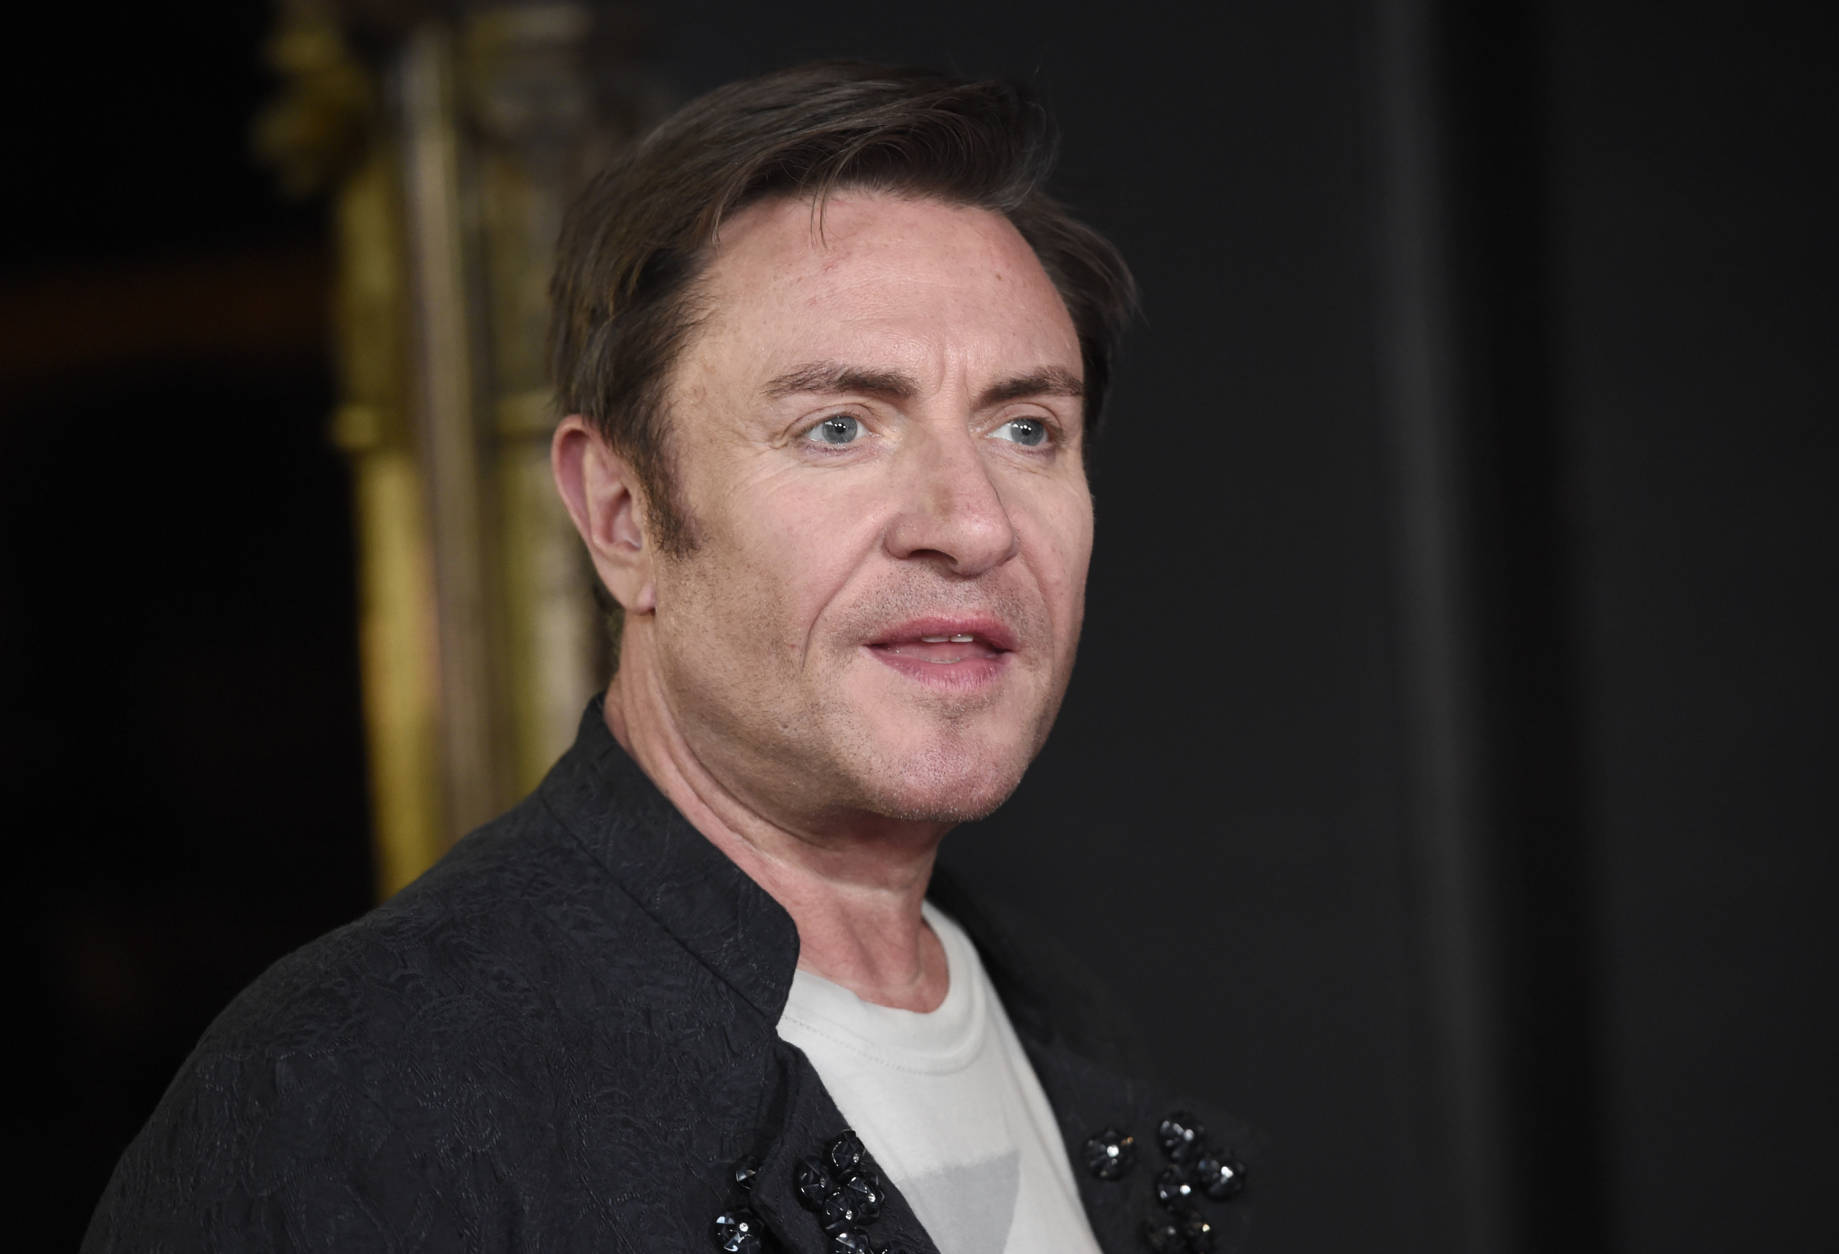 Simon Le Bon, of Duran Duran, attends the David Lynch Foundation Music Celebration at the Theatre at Ace Hotel on Wednesday, April 1, 2015, in Los Angeles. (Photo by Chris Pizzello/Invision/AP)